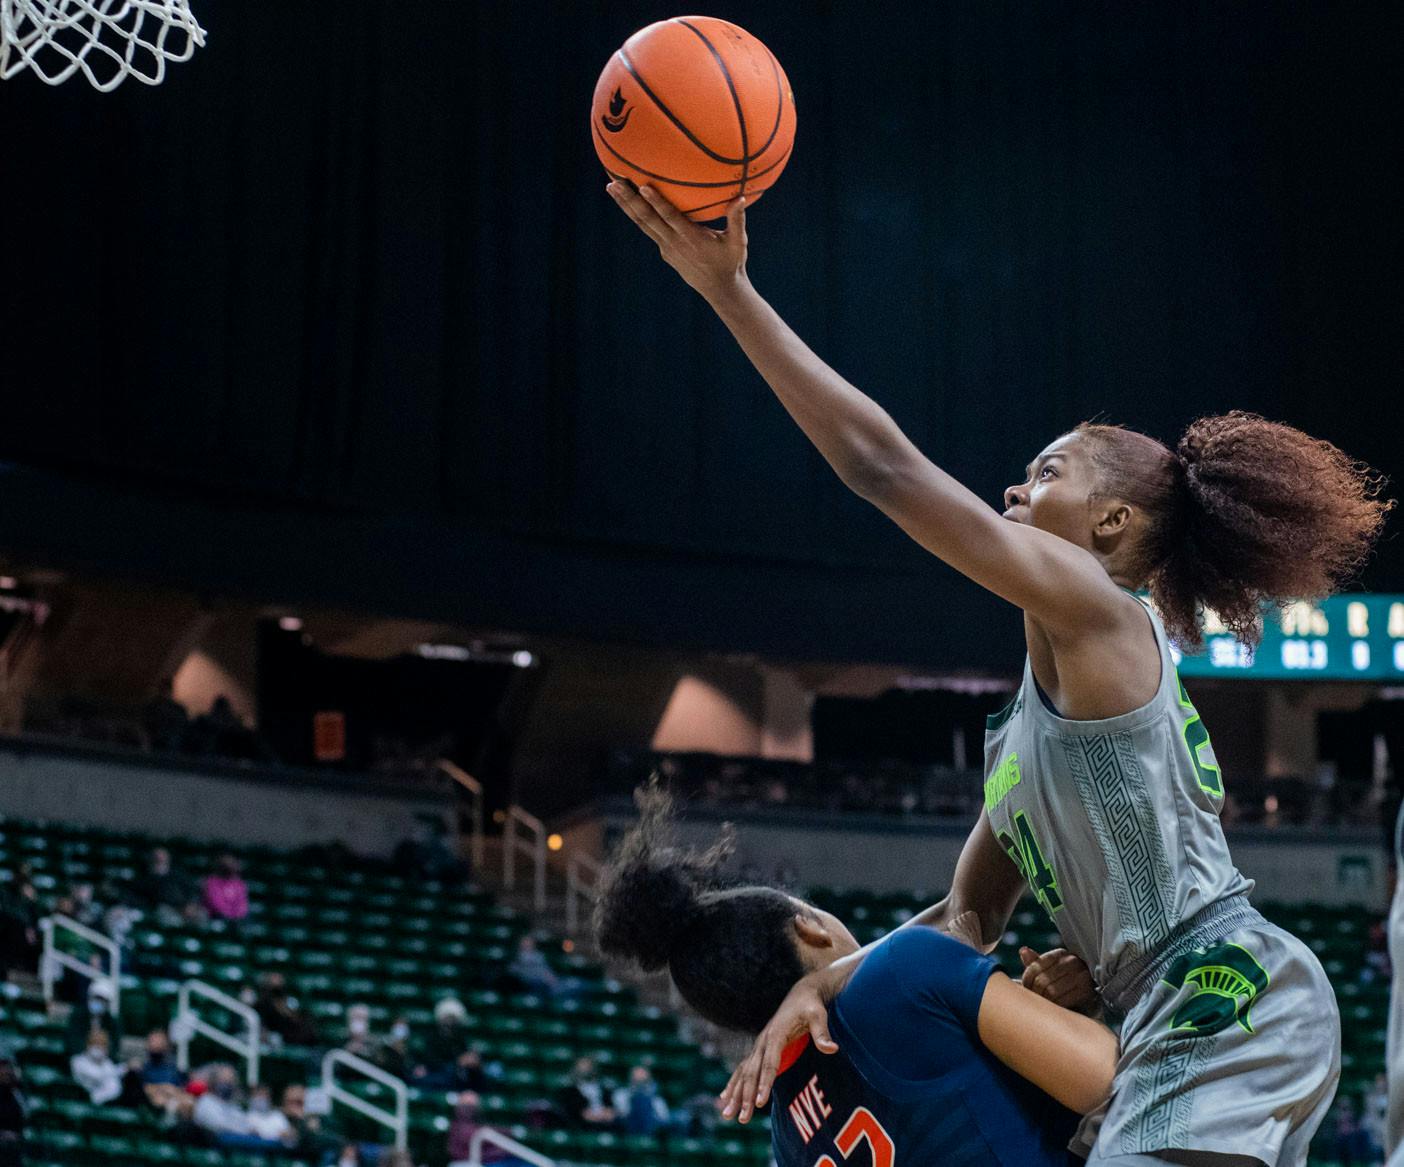 <p>Senior guard Nia Clouden (24) leaps over Illinois&#x27;s sophomore guard Aaliyah Nye to score during the second quarter of the game. The Spartans beat the Fighting Illini, 75-60, in their Big Ten opener on Dec. 9, 2021.</p>